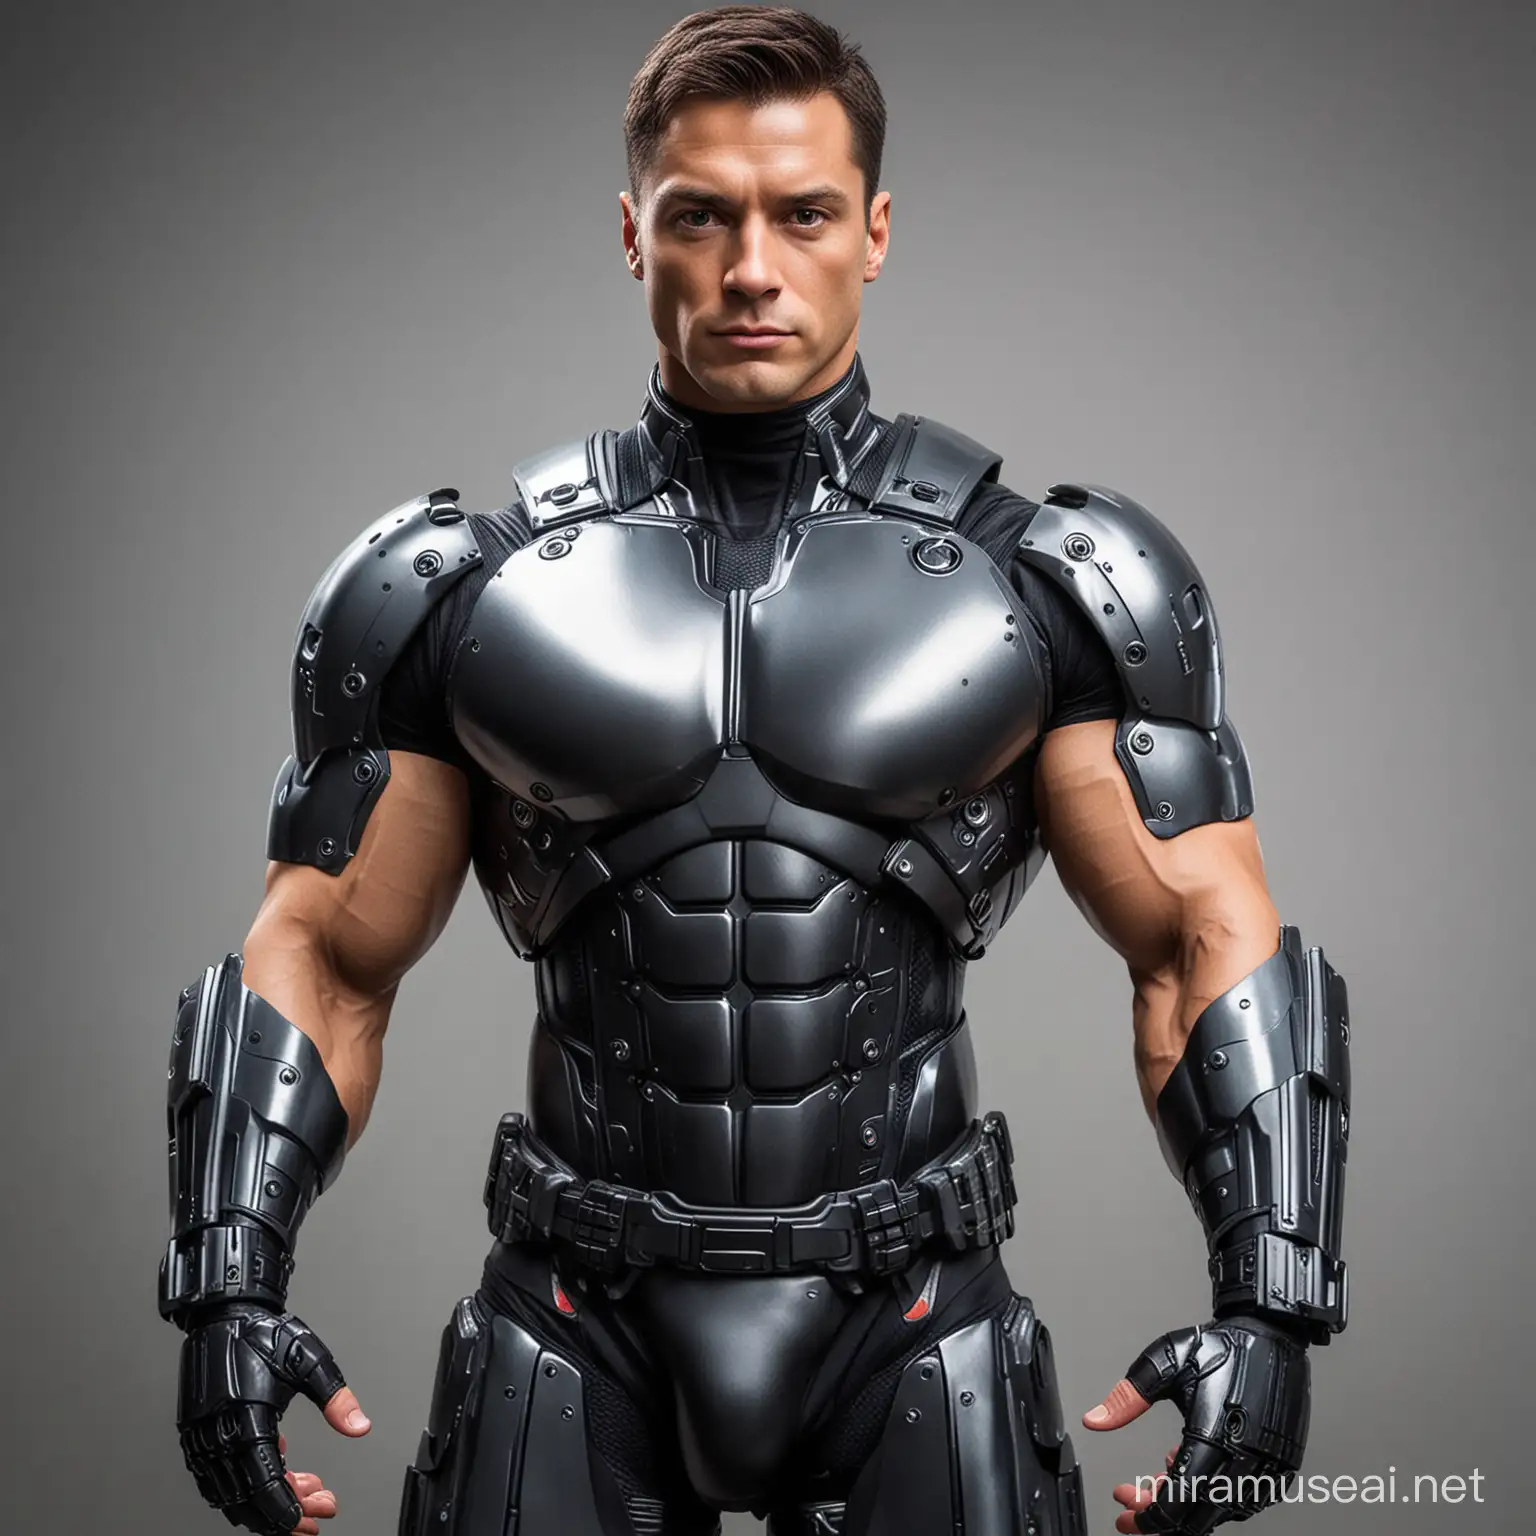 RoboCop, White Male, Olive Skin, Heavy Sexy Swole, Bodybuilders, Fullview, Posing Mode, Doing An YouTube Video, Selfie Photograph.